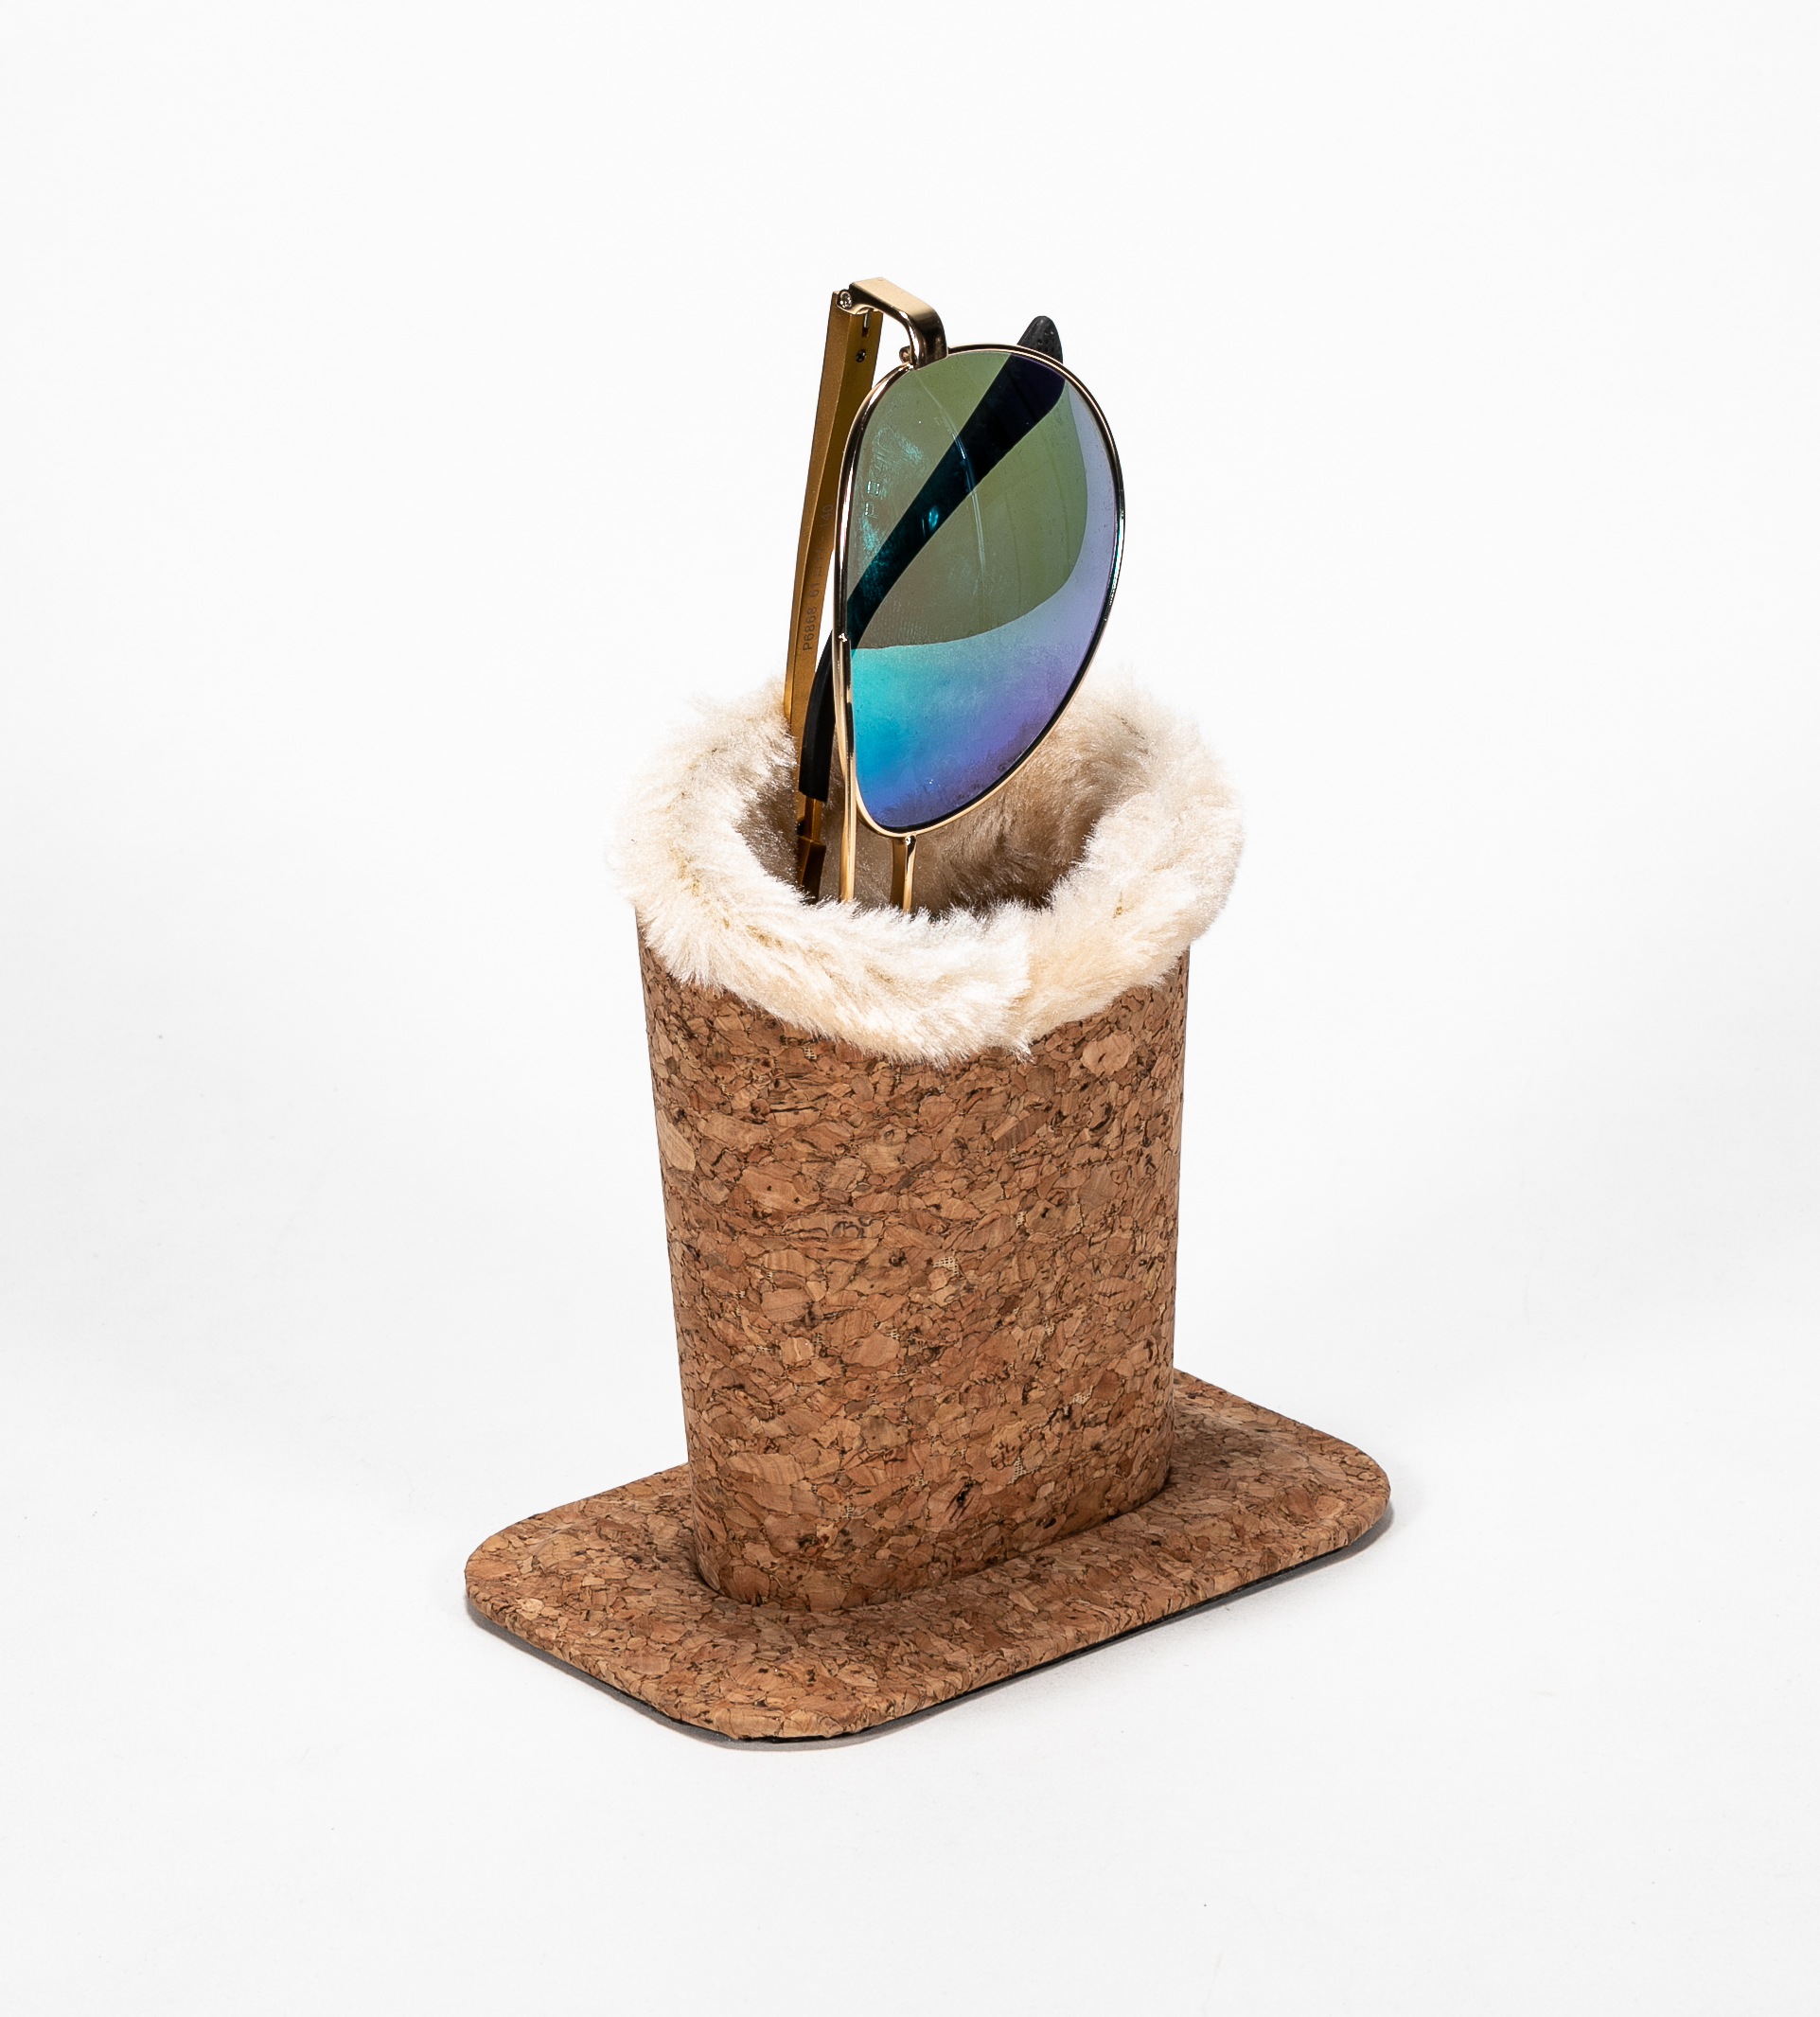 2021 Sunglasses, Brown Wood Grain, Lined with Fluffy Decorative Glasses Display Case